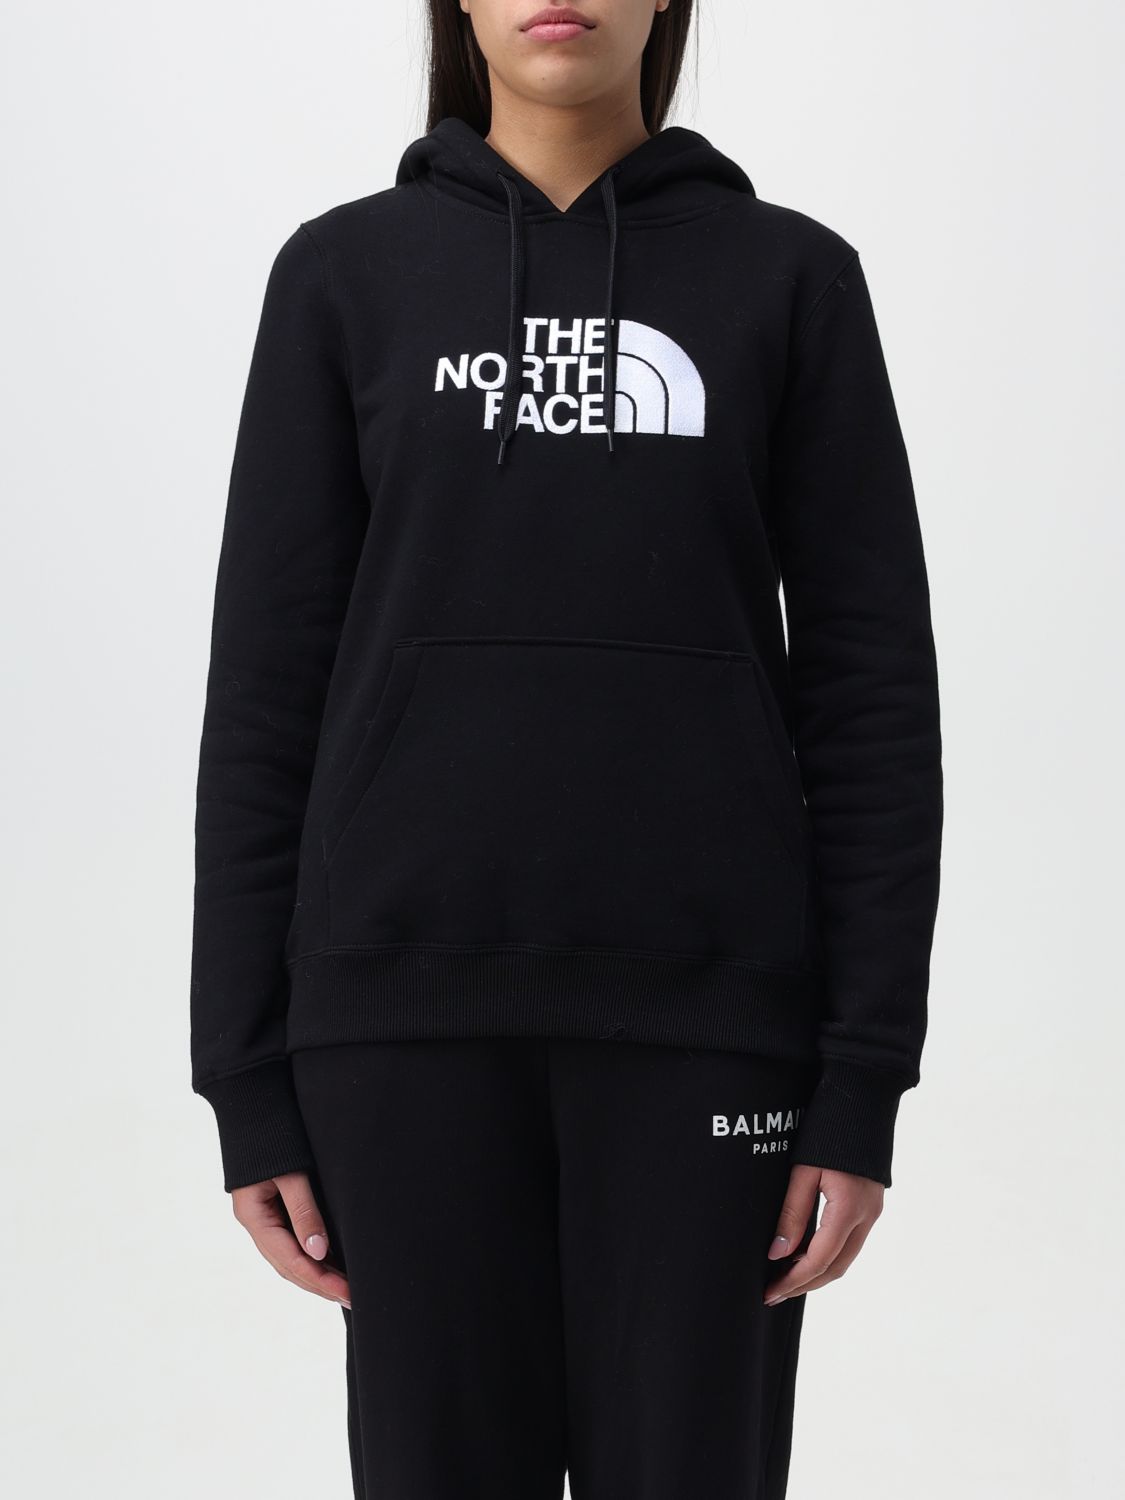 The North Face sweatshirt for woman